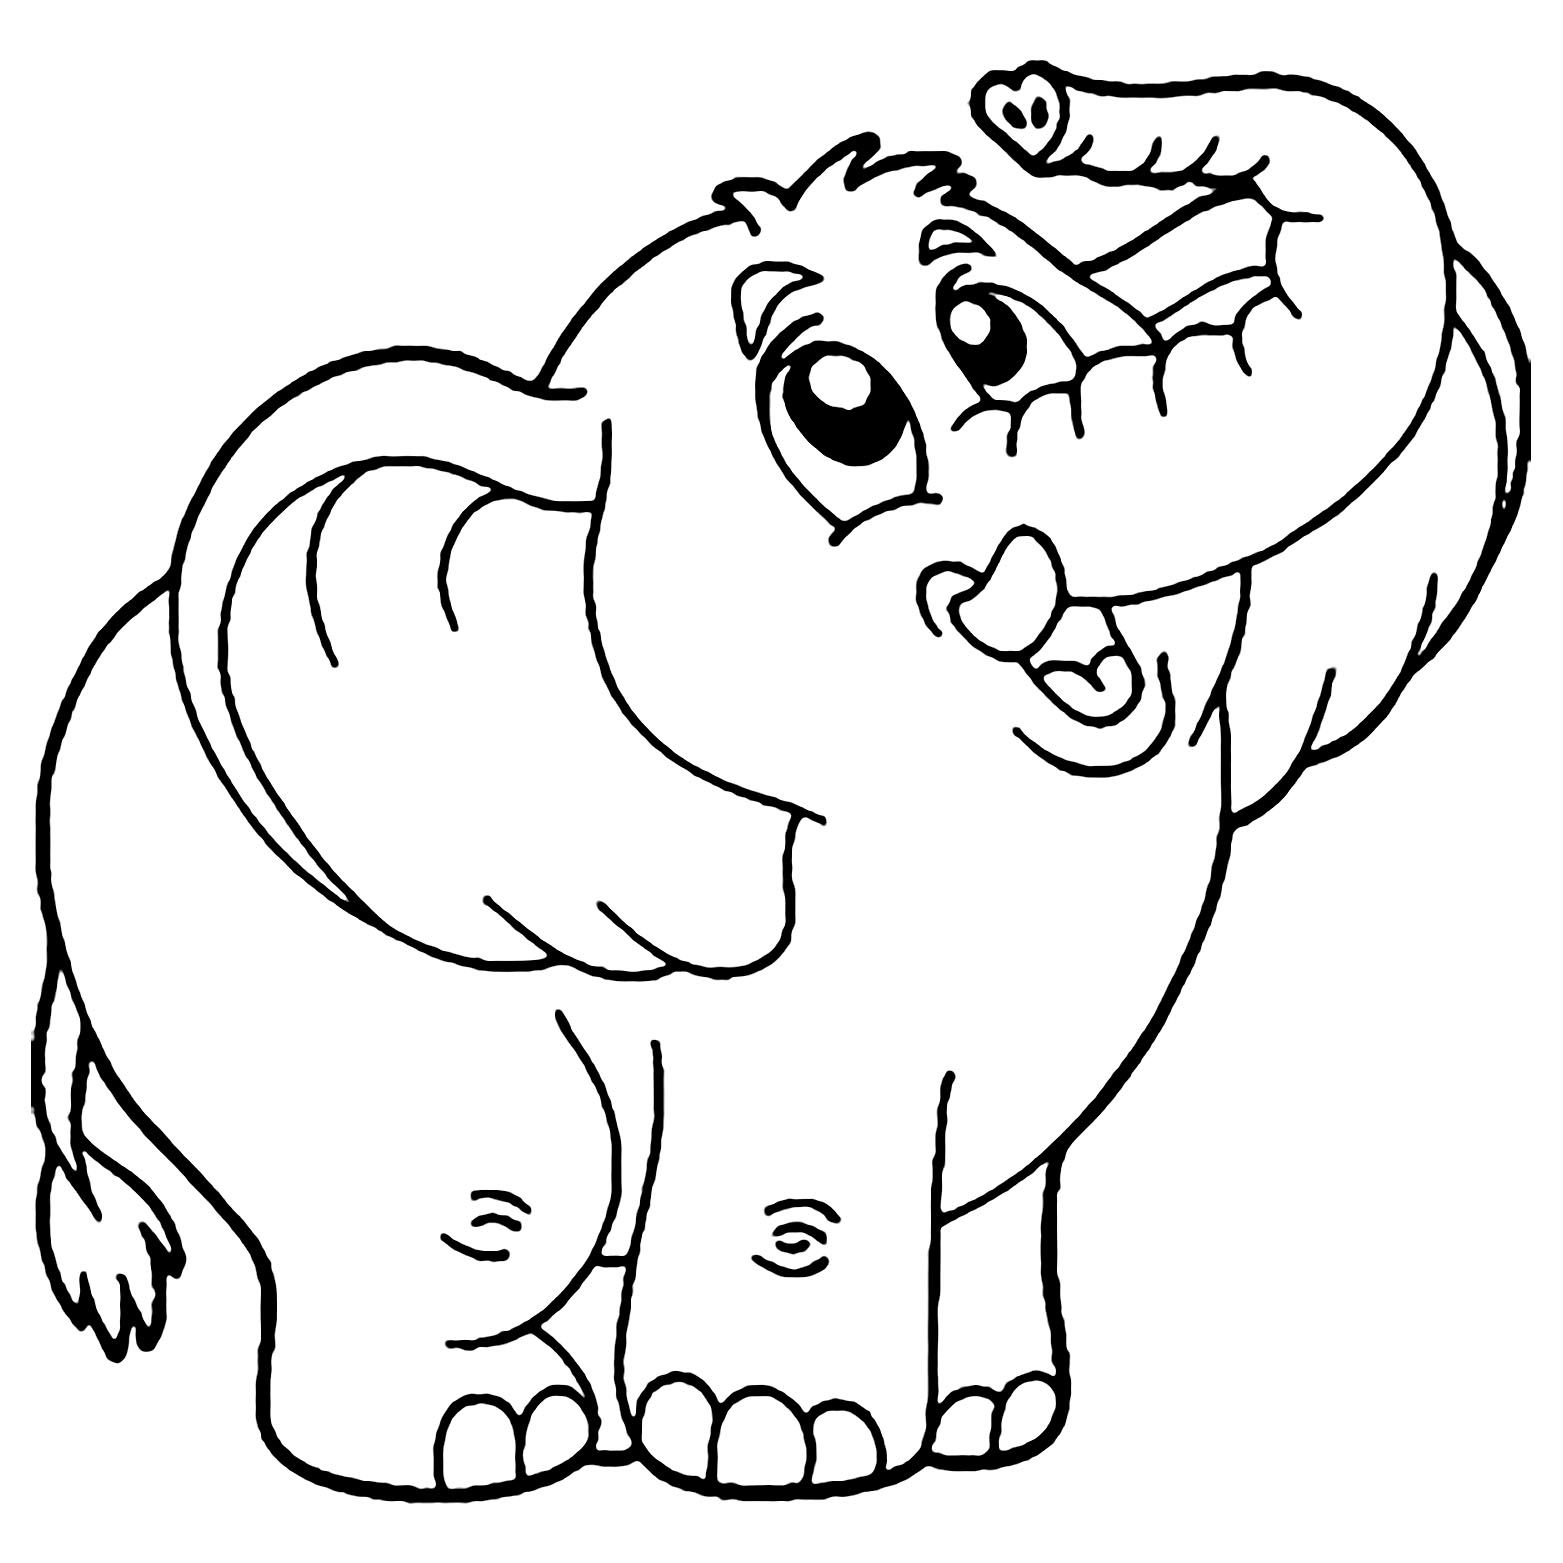 Download Coloring Pages For Kids Elephant : Color this friendly ...